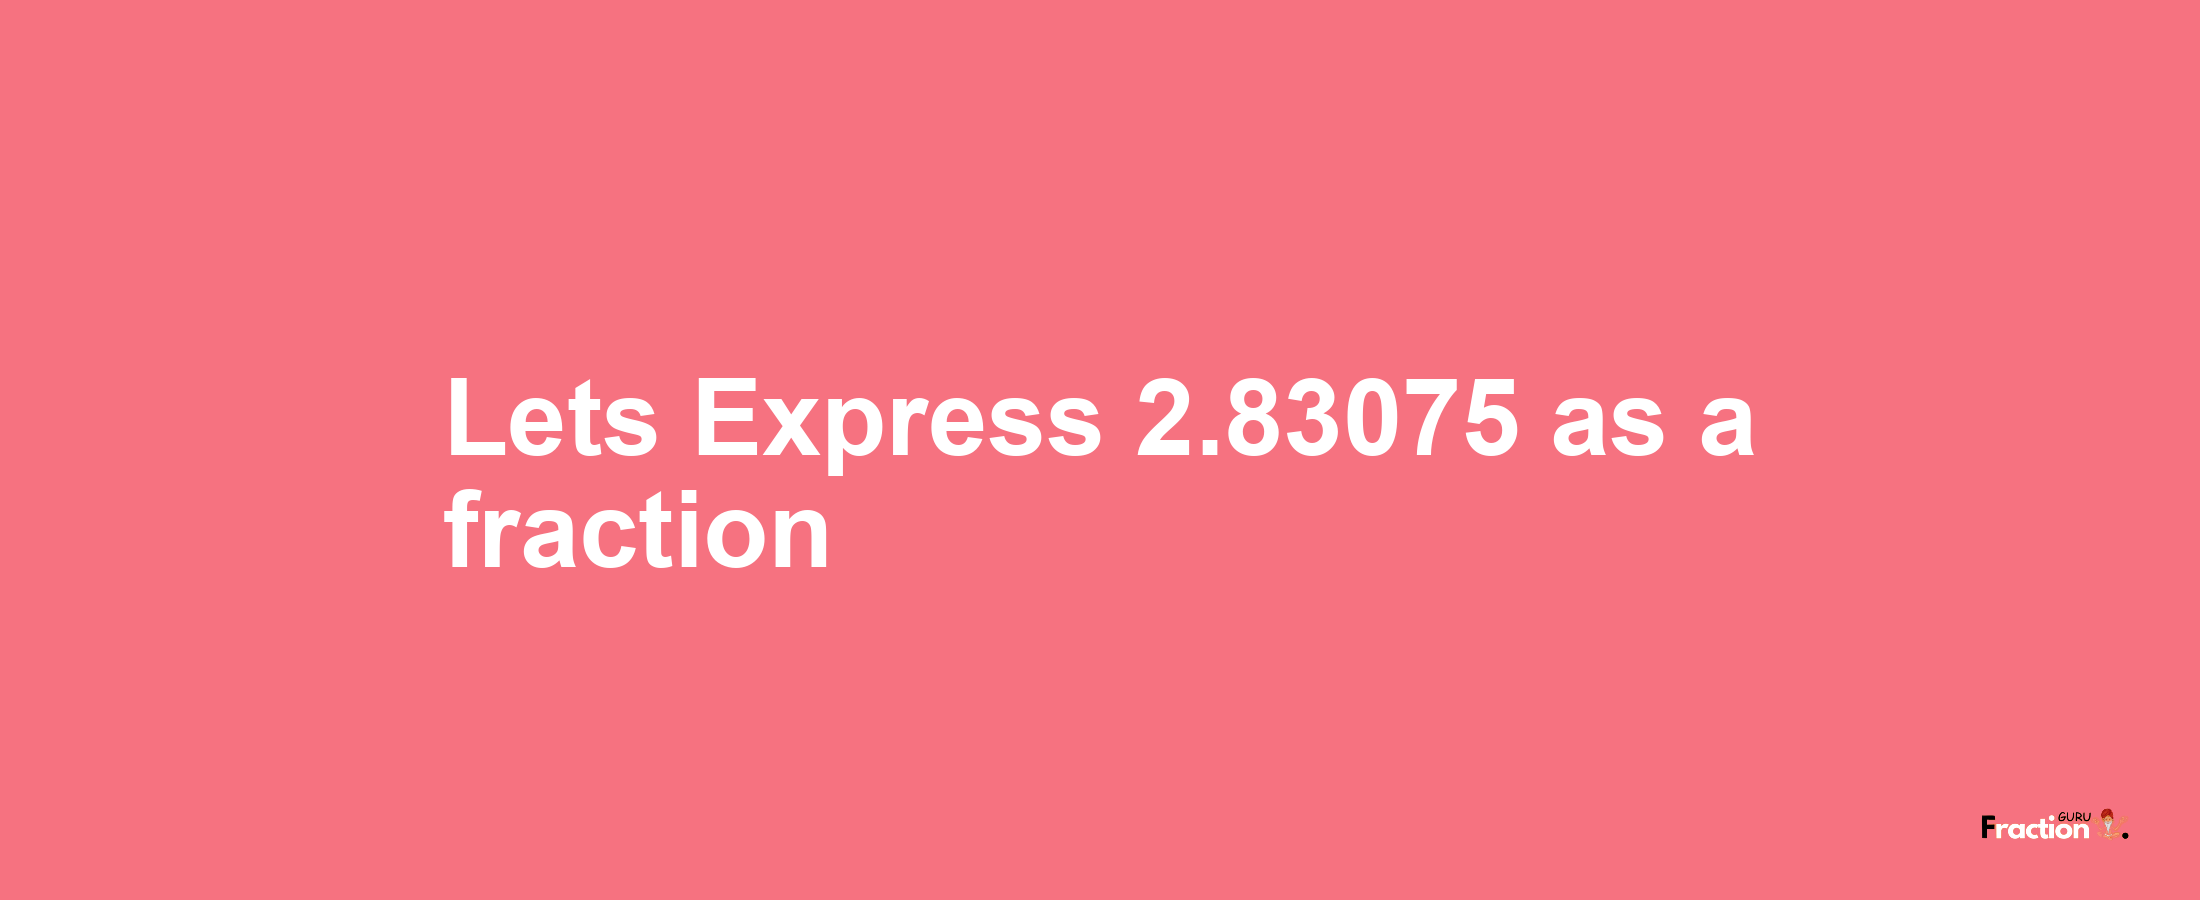 Lets Express 2.83075 as afraction